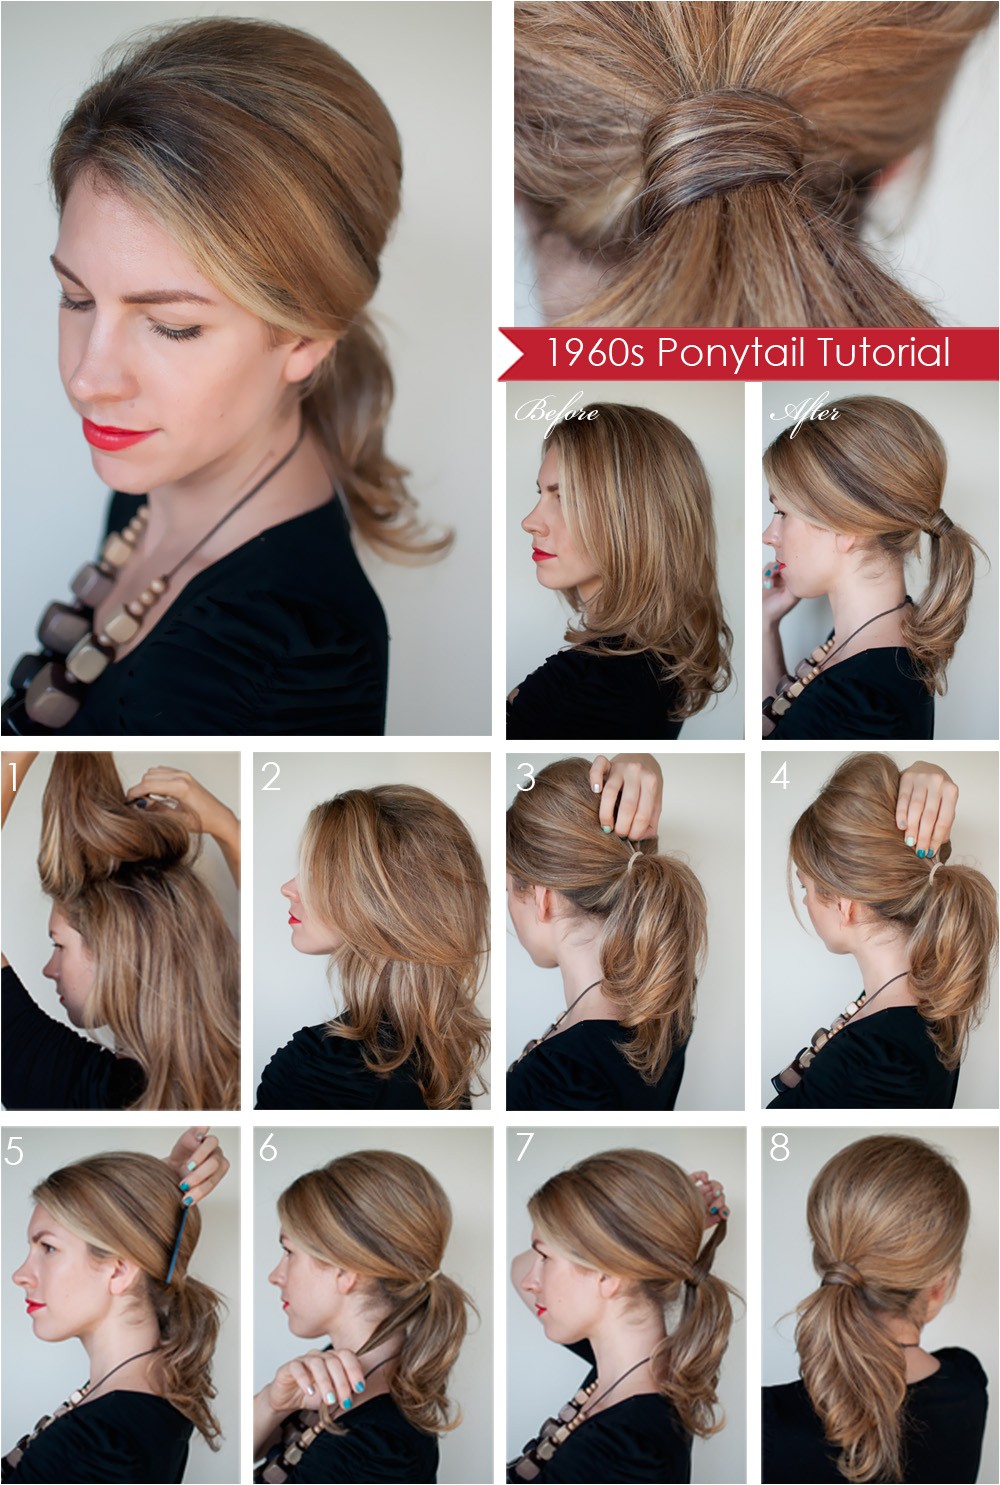 hairstyle how to create a 1960s style ponytail